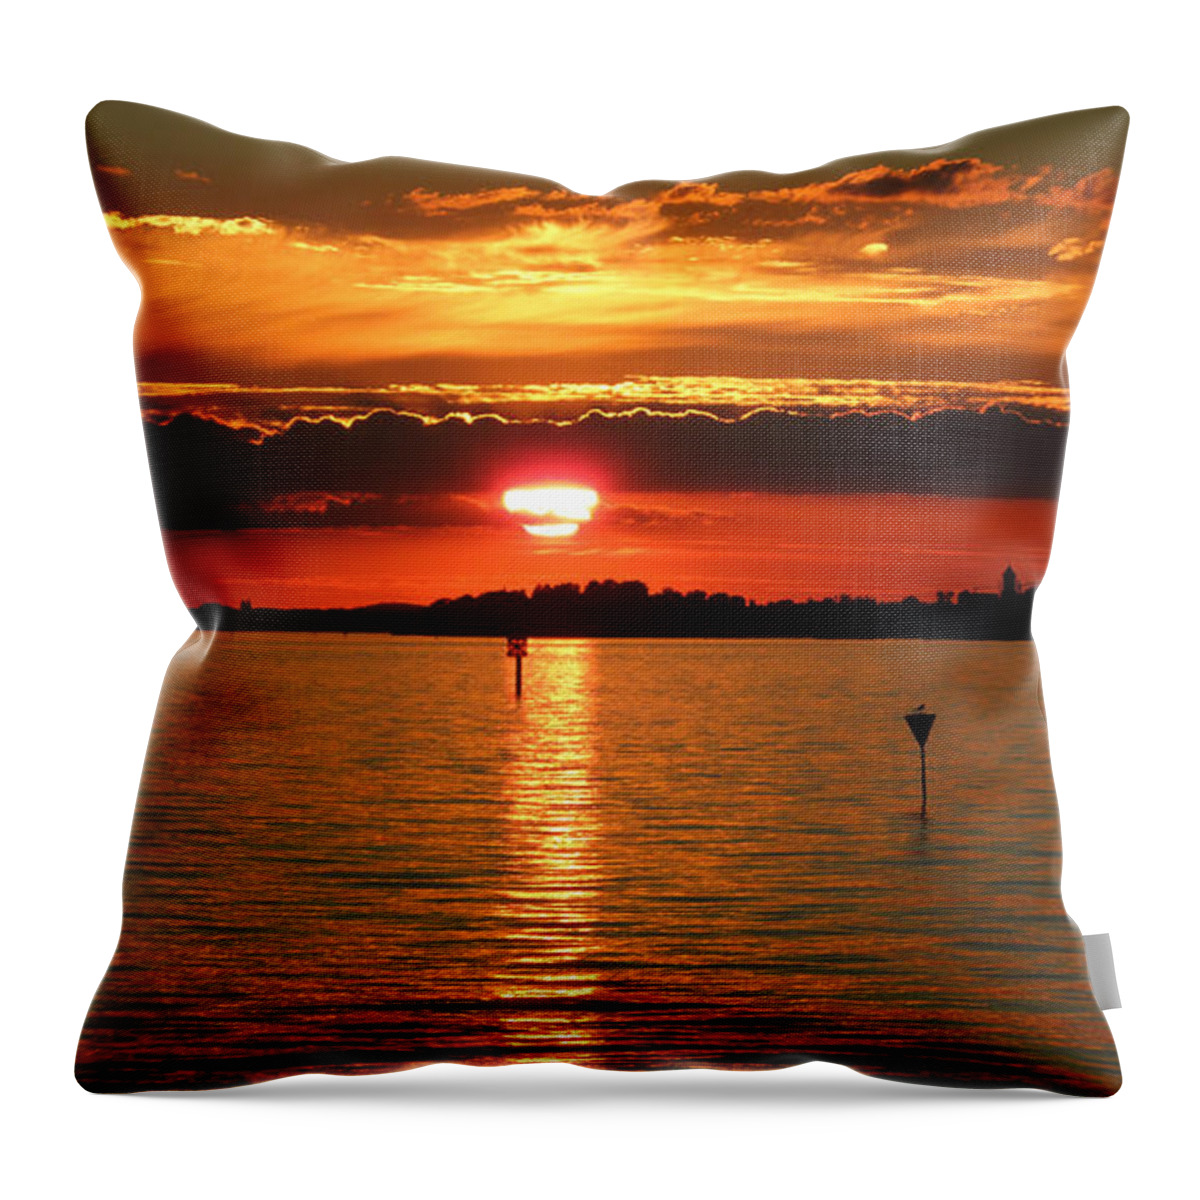 Colette Throw Pillow featuring the photograph Bodensee Island Sunset by Colette V Hera Guggenheim